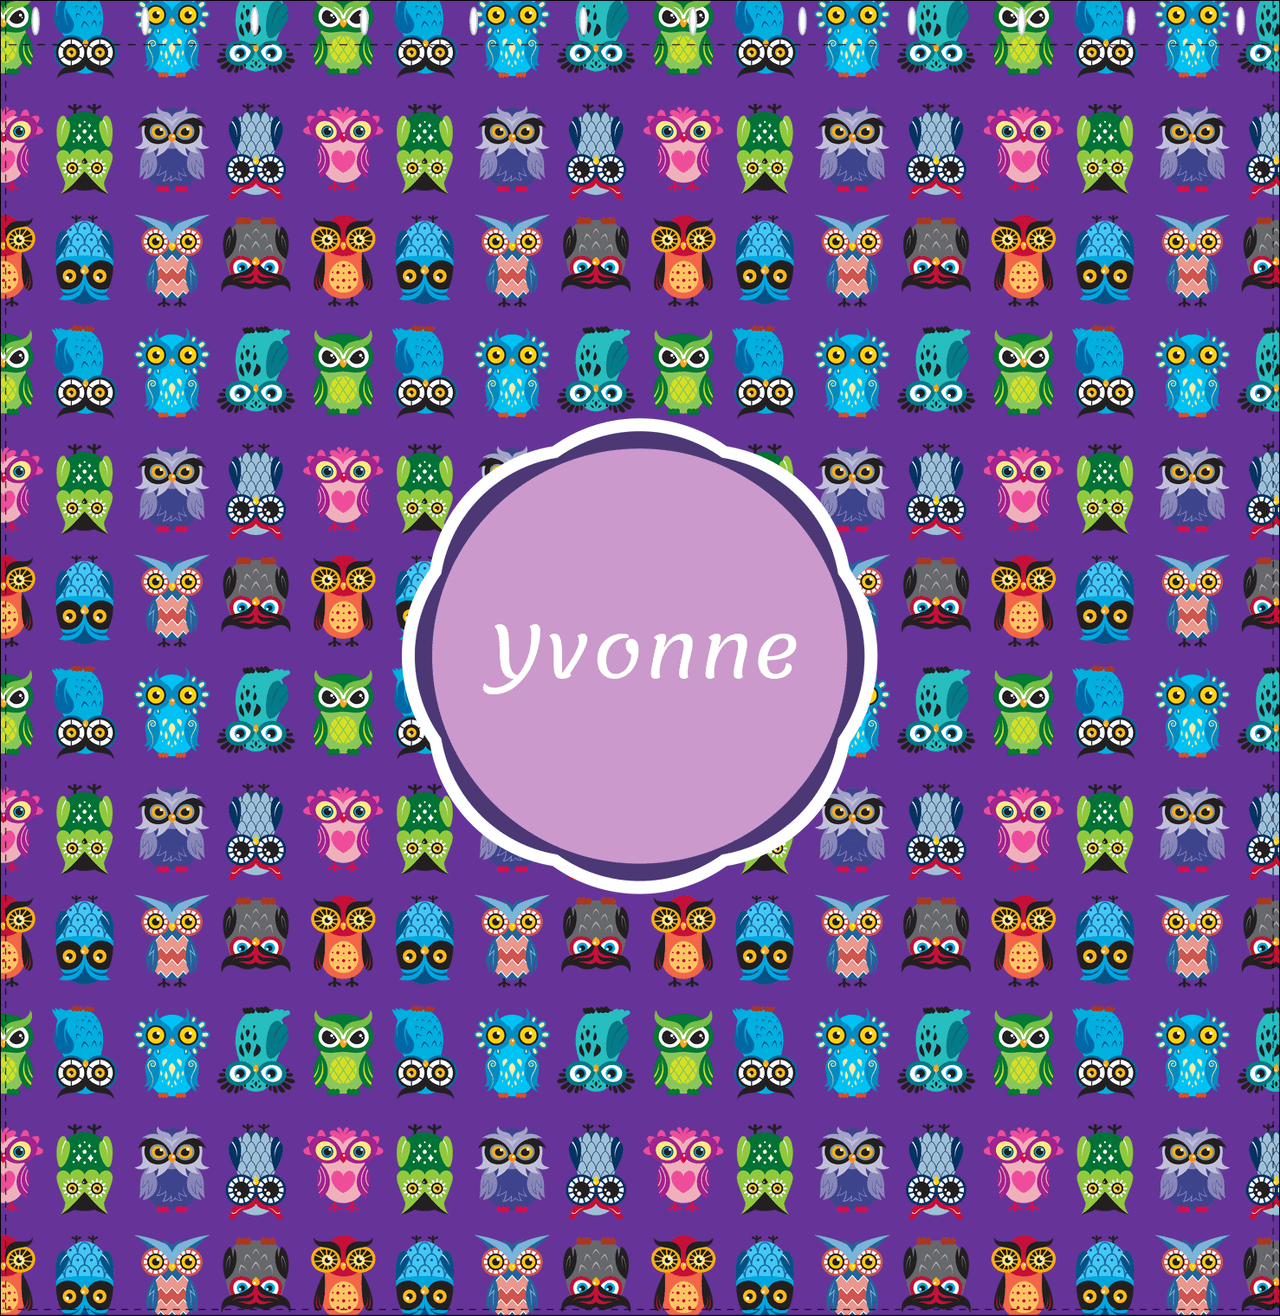 Personalized Owl Shower Curtain X - All Owls - Purple Background - Circle Nameplate - Decorate View